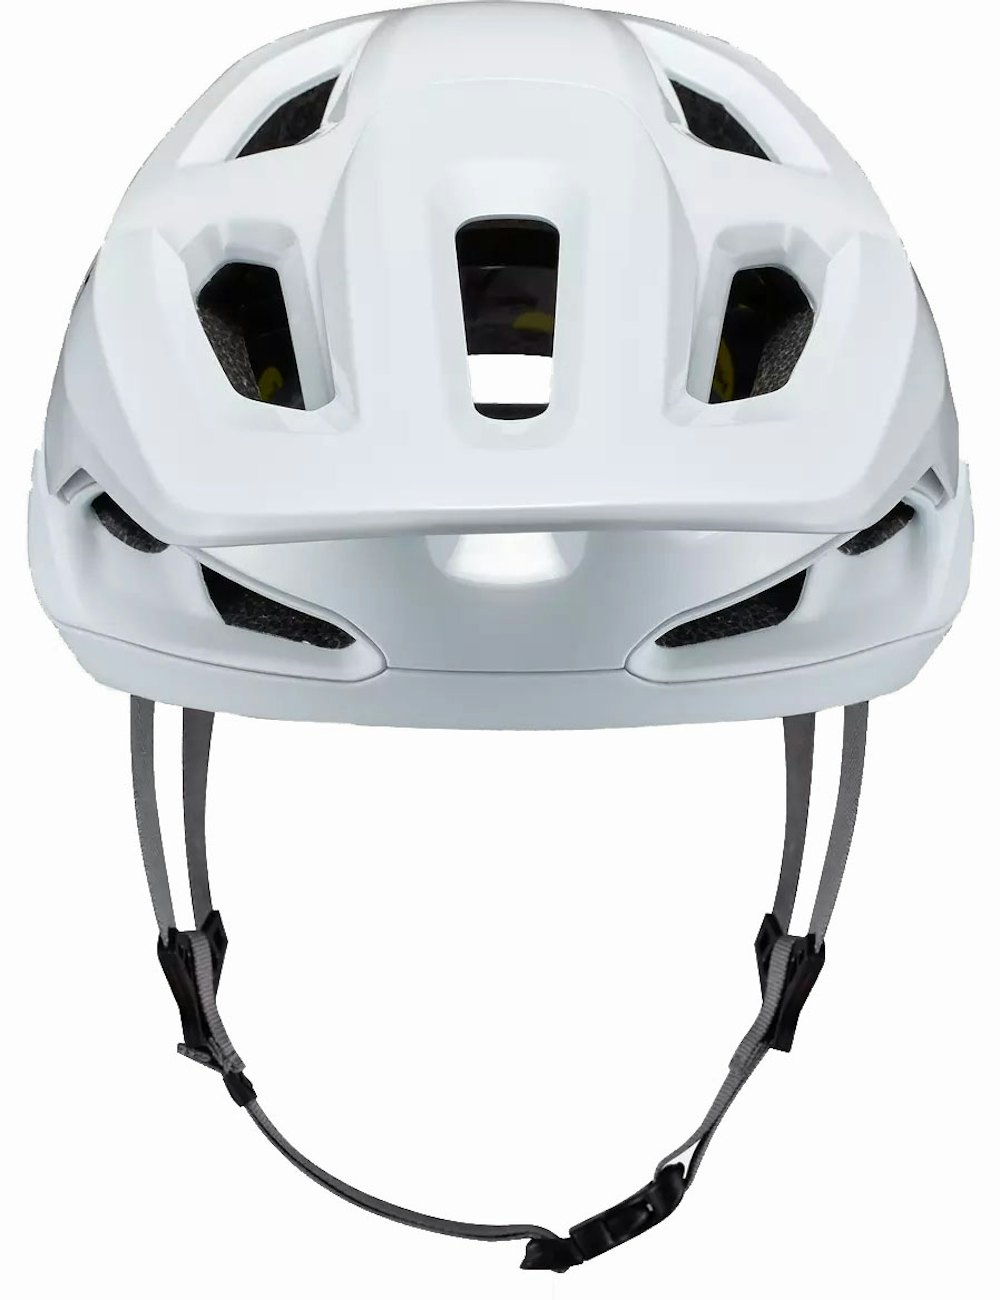 SPECIALIZED TACTIC 4 HELMET CPSC ROUND FIT